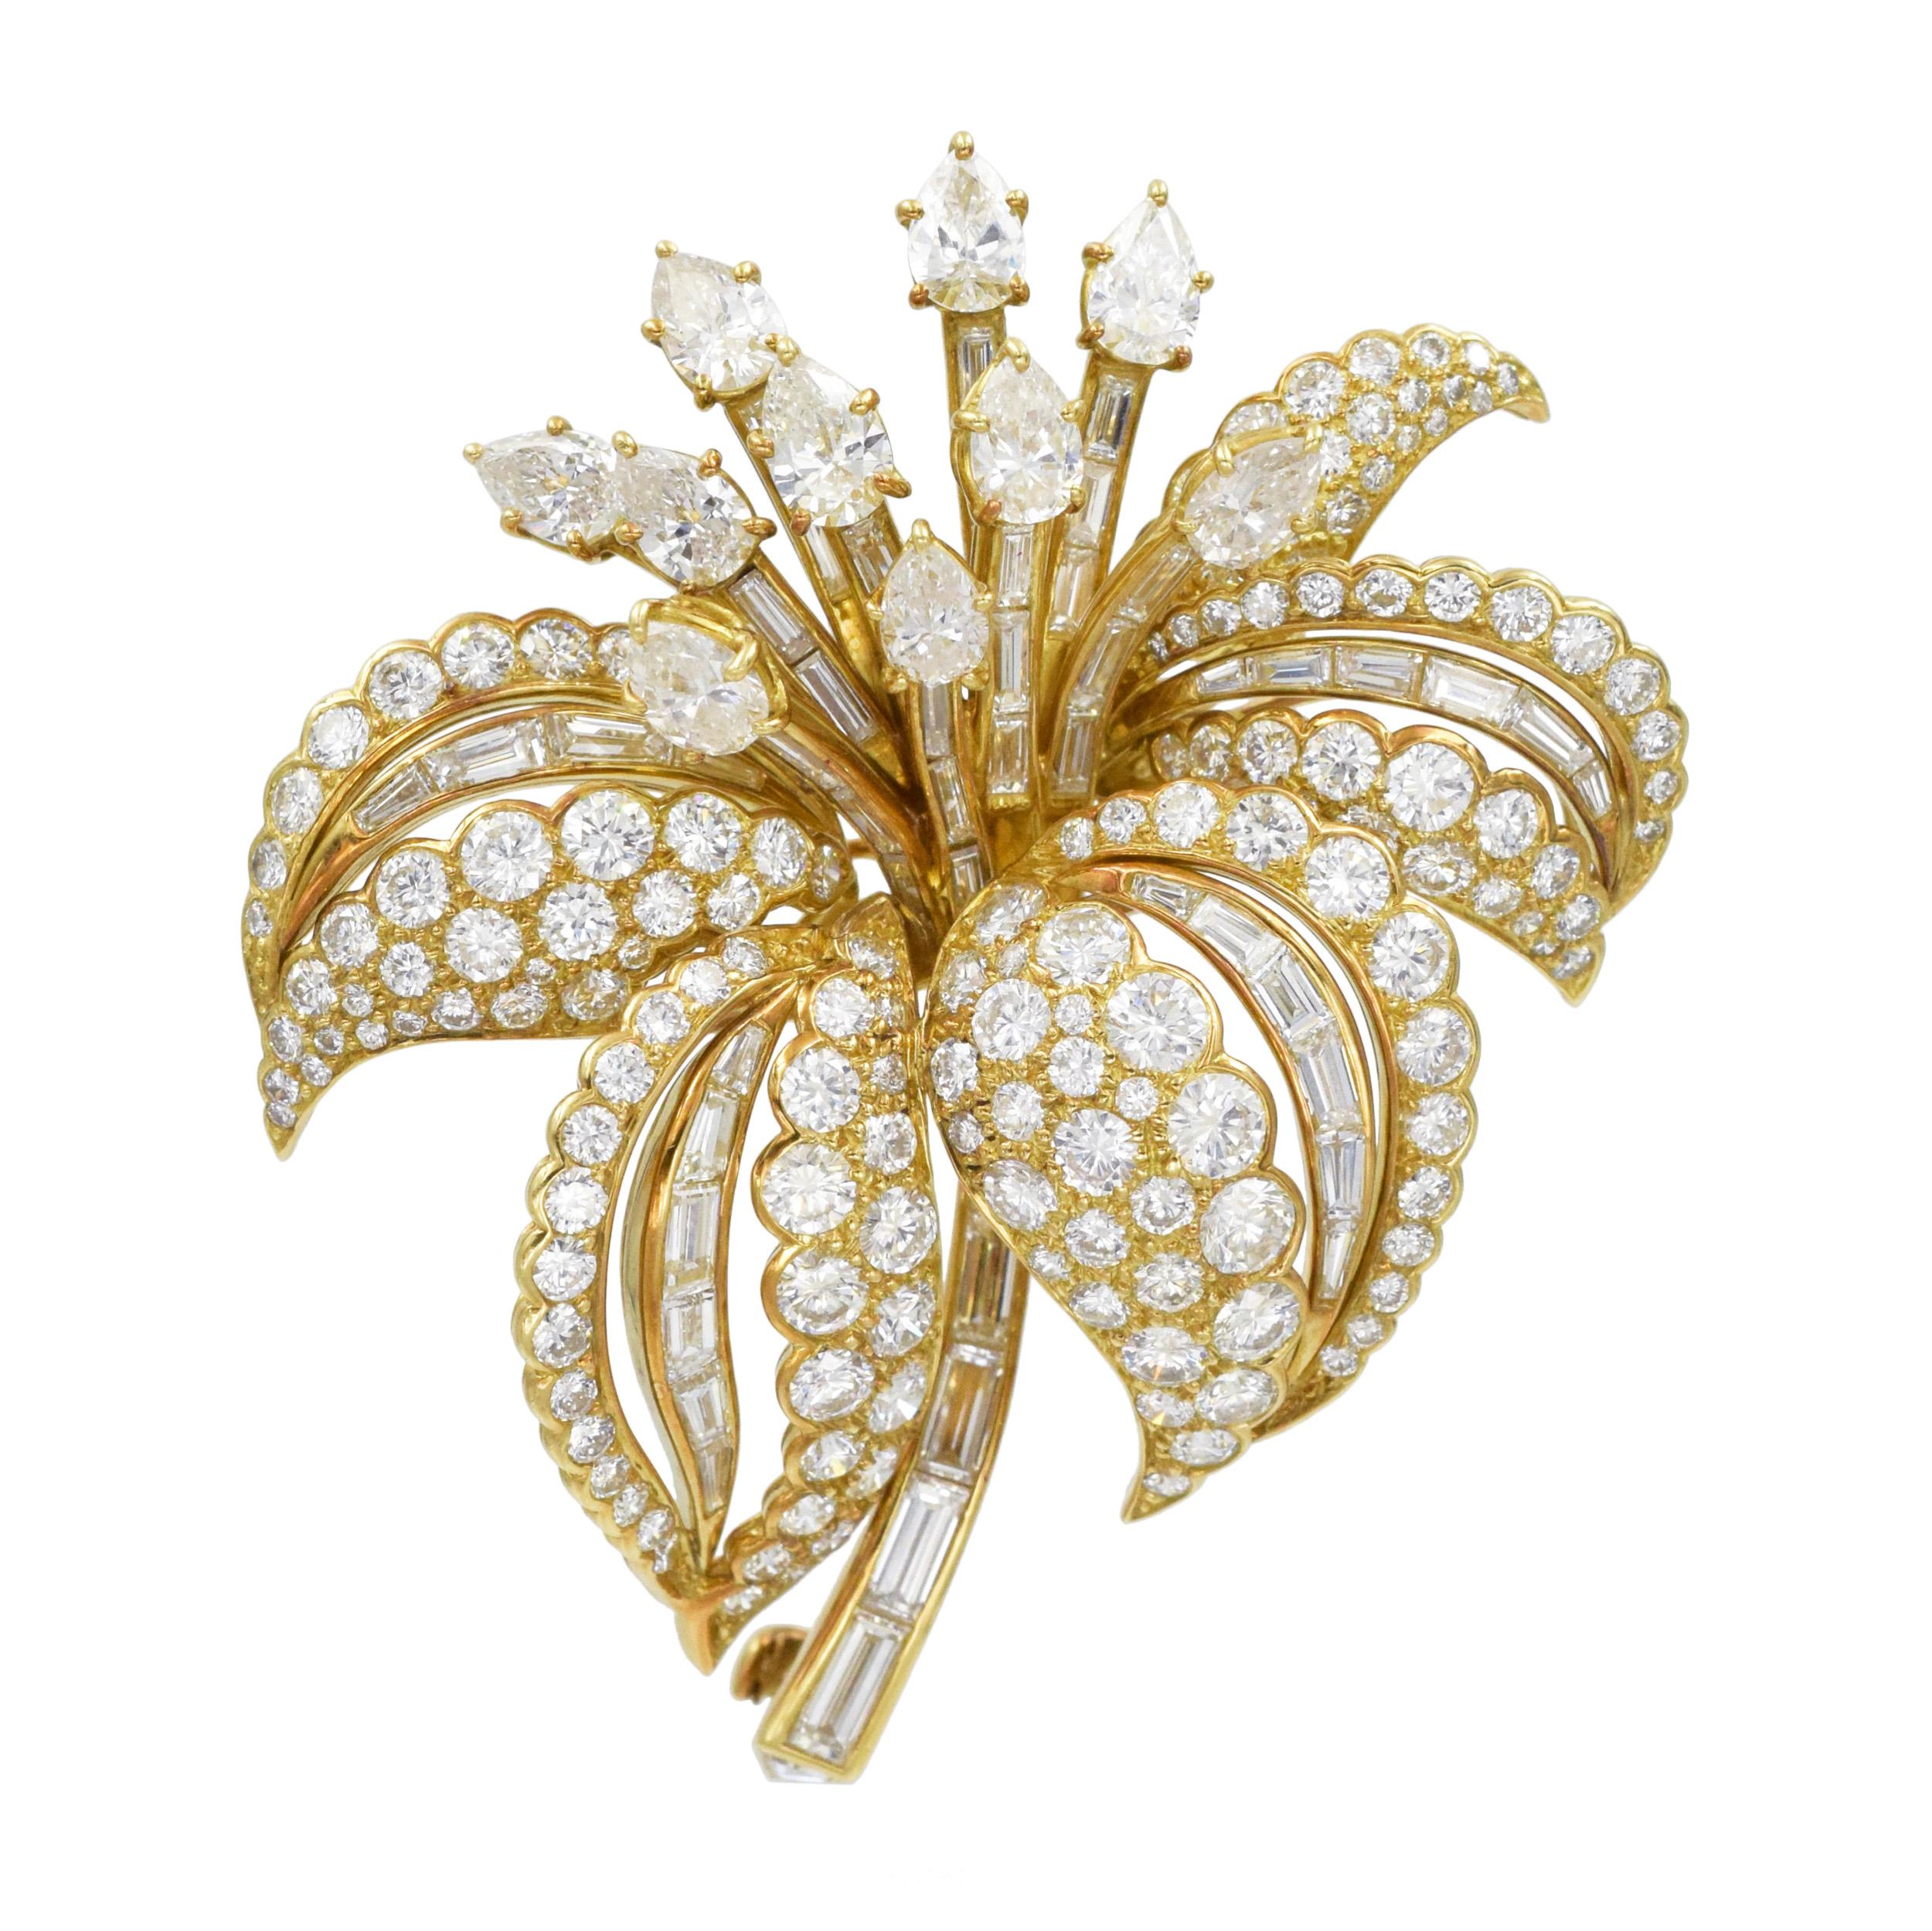 Cartier diamond flower brooch in 18k yellow gold. 
This brooch consists of 10 pear shape diamonds with total weight of approximately 2.50ct , 163 round brilliant cut diamonds with total weight of approximately 6.00ct, 57 tapered and straight